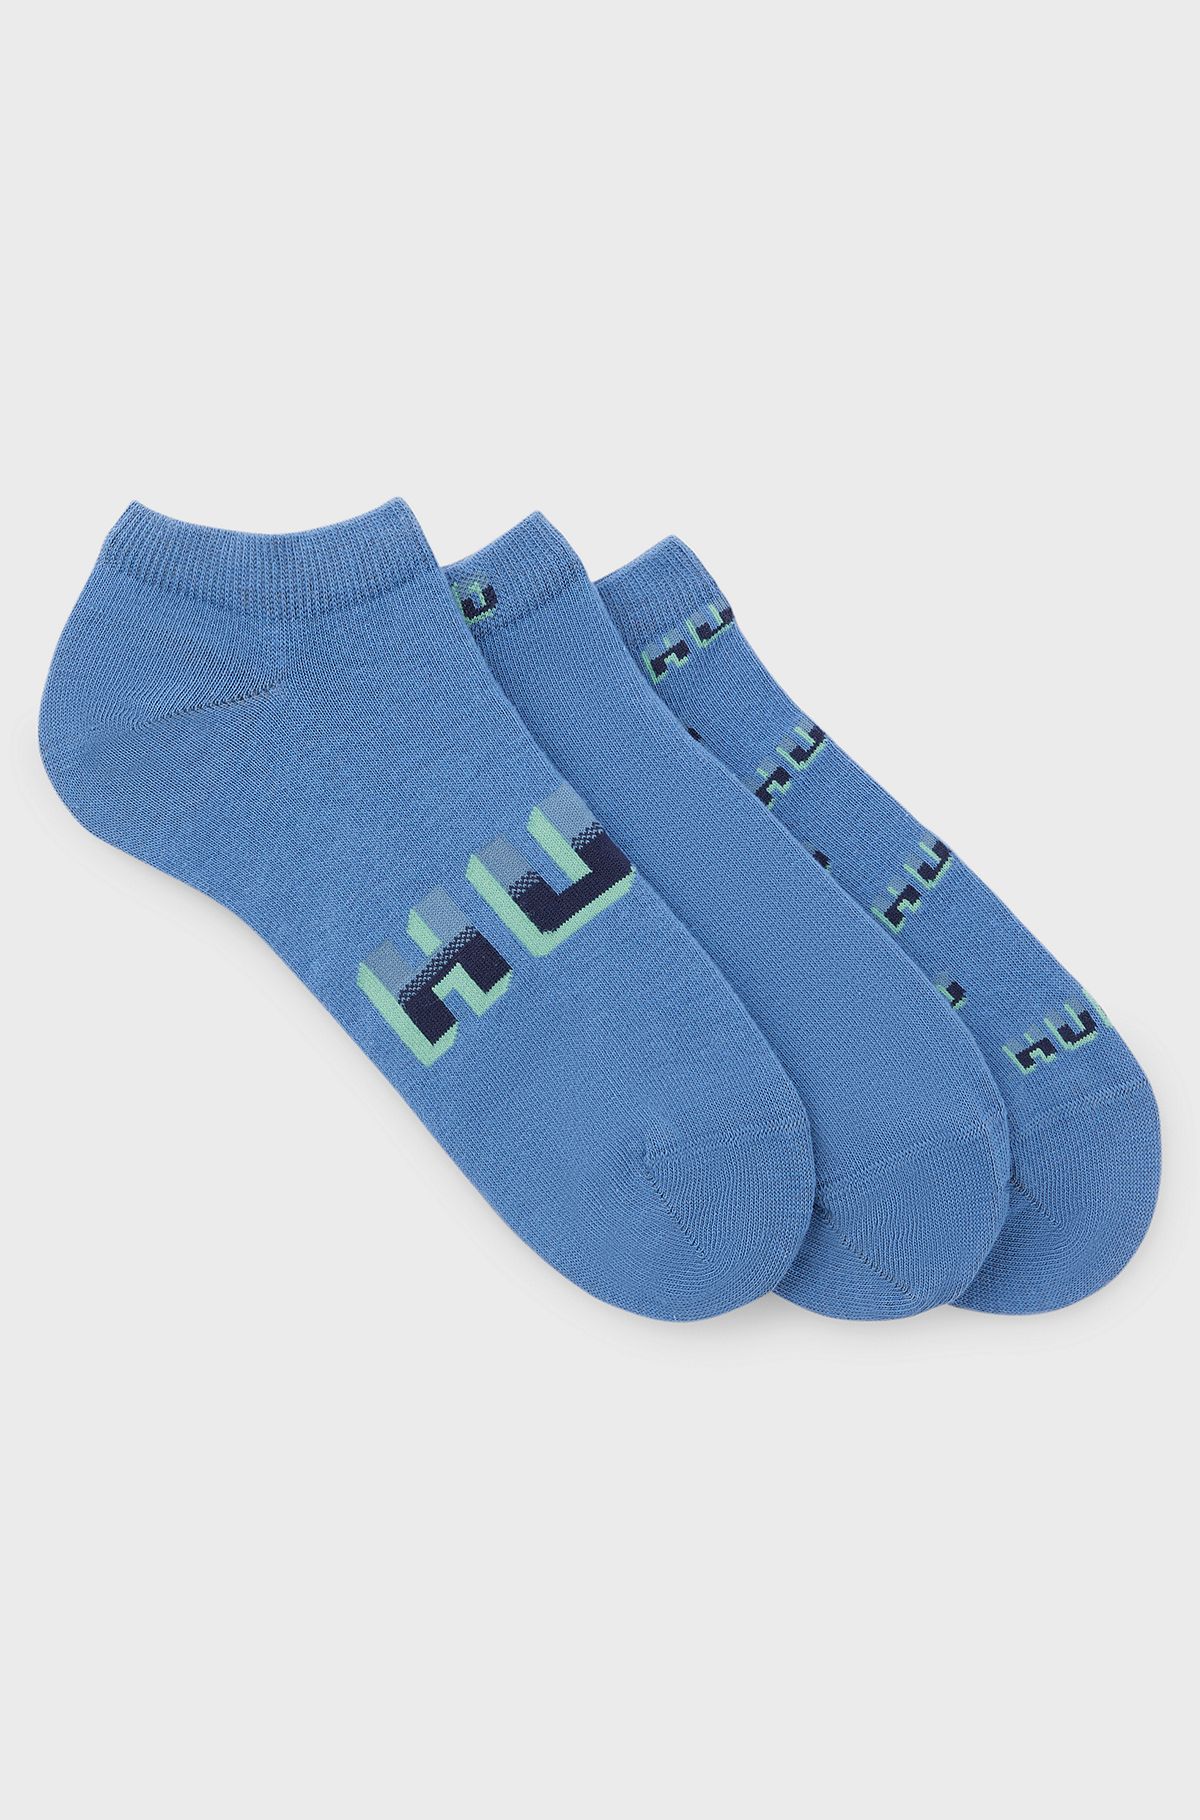 Three-pack of cotton-blend ankle socks with logos, Blue